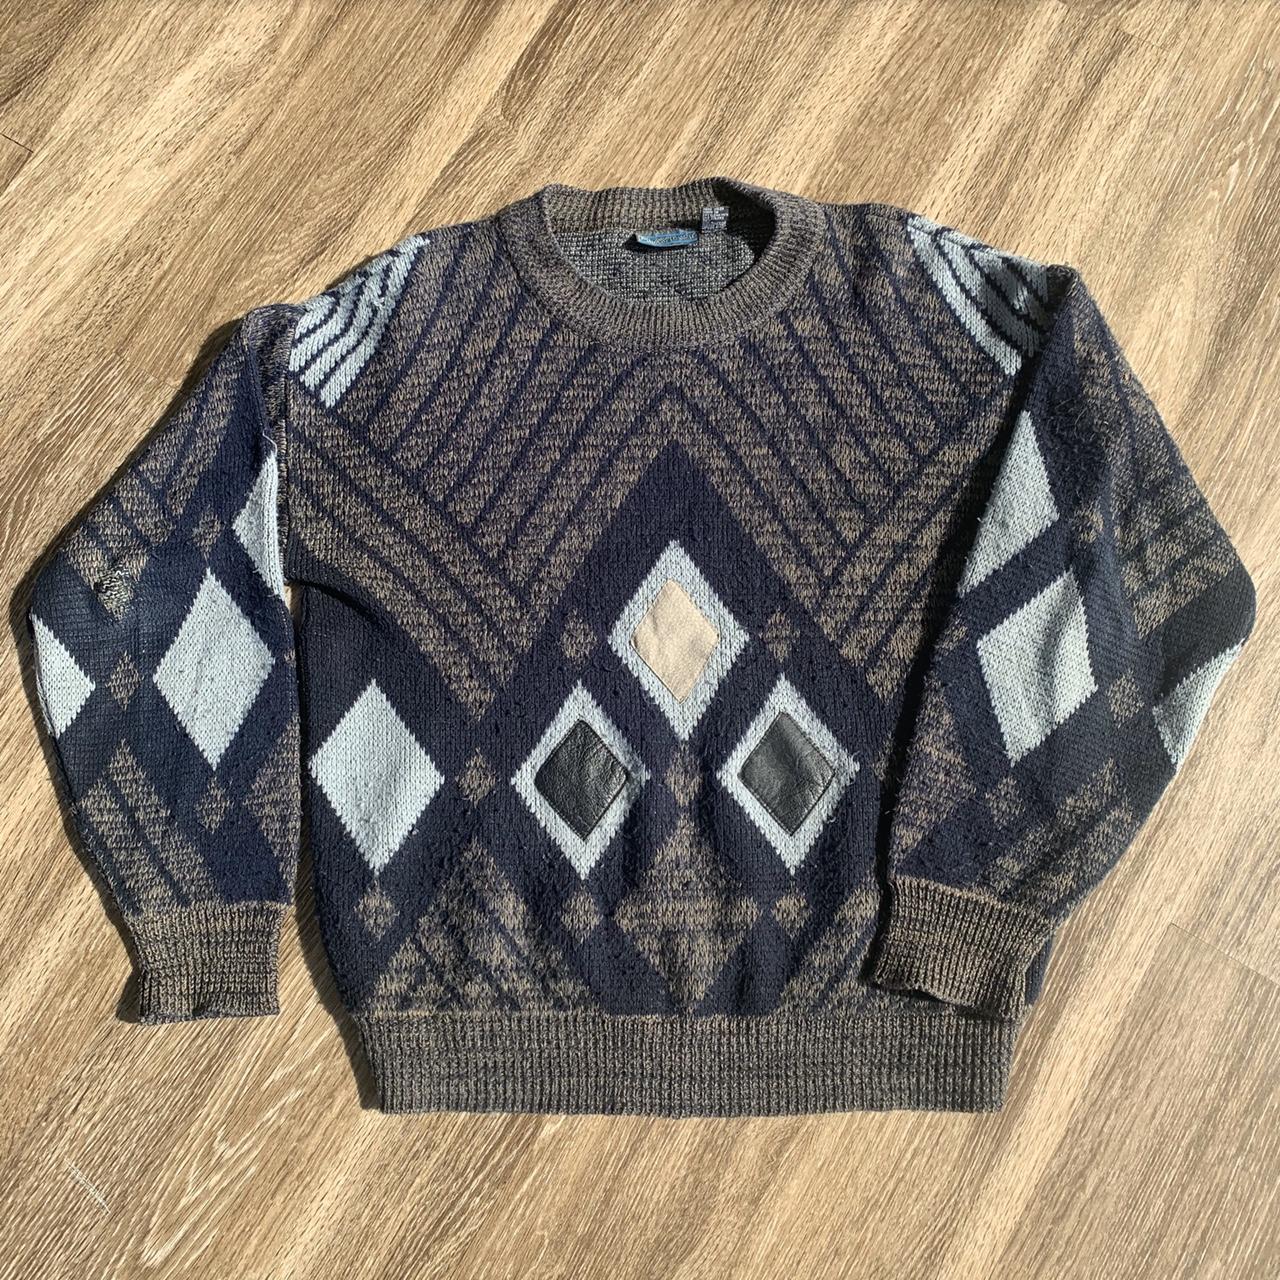 Playboy Vintage Sweater 1980s Knit Sweater With... - Depop